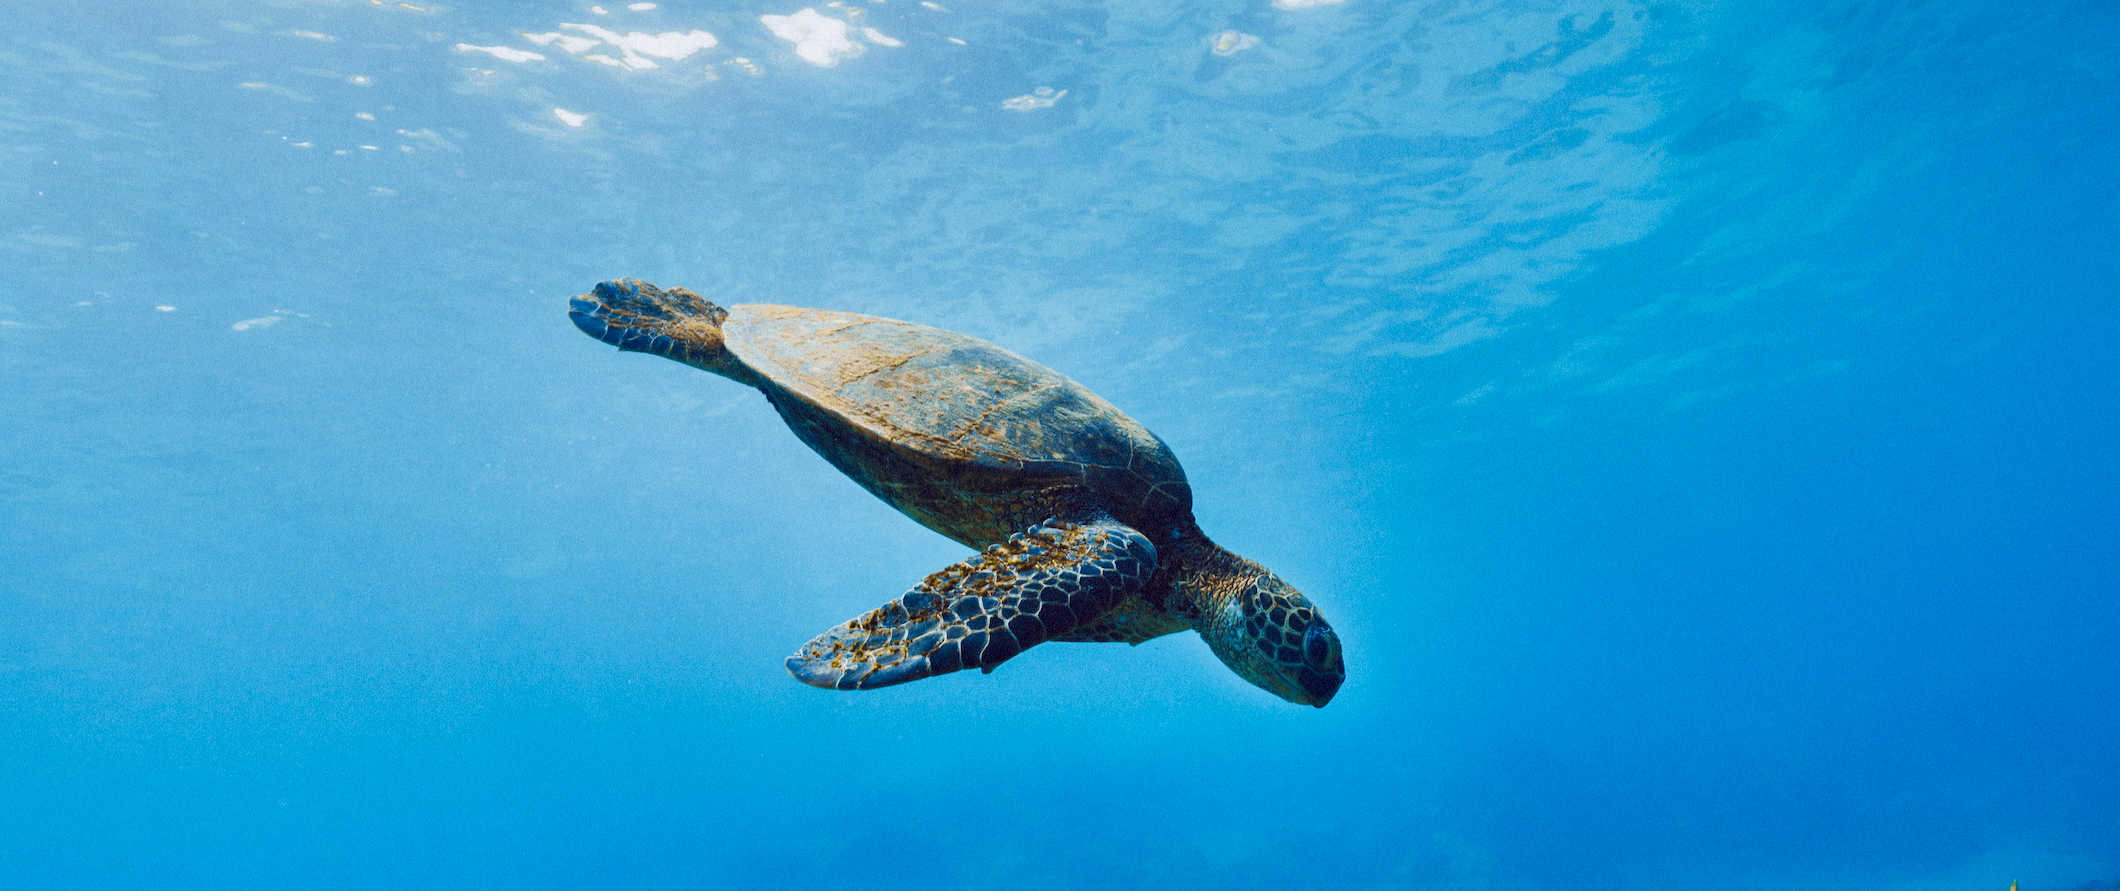 A turtle swimming underwater in the clear, blue waters of the Galapagos Islands in Ecuador